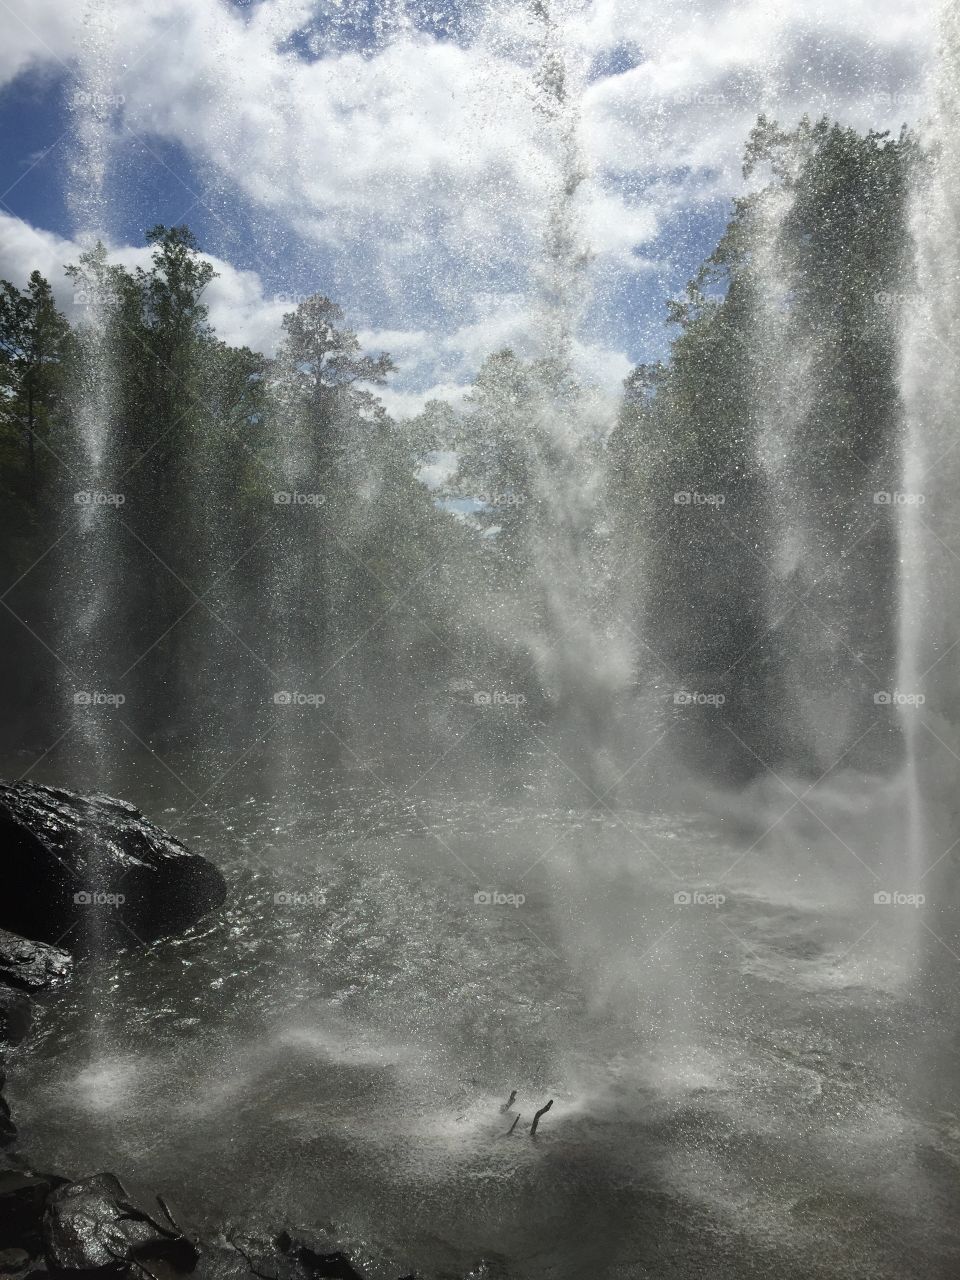 Looking out from behind a waterfall gives an entirely different perspective of this scenic view